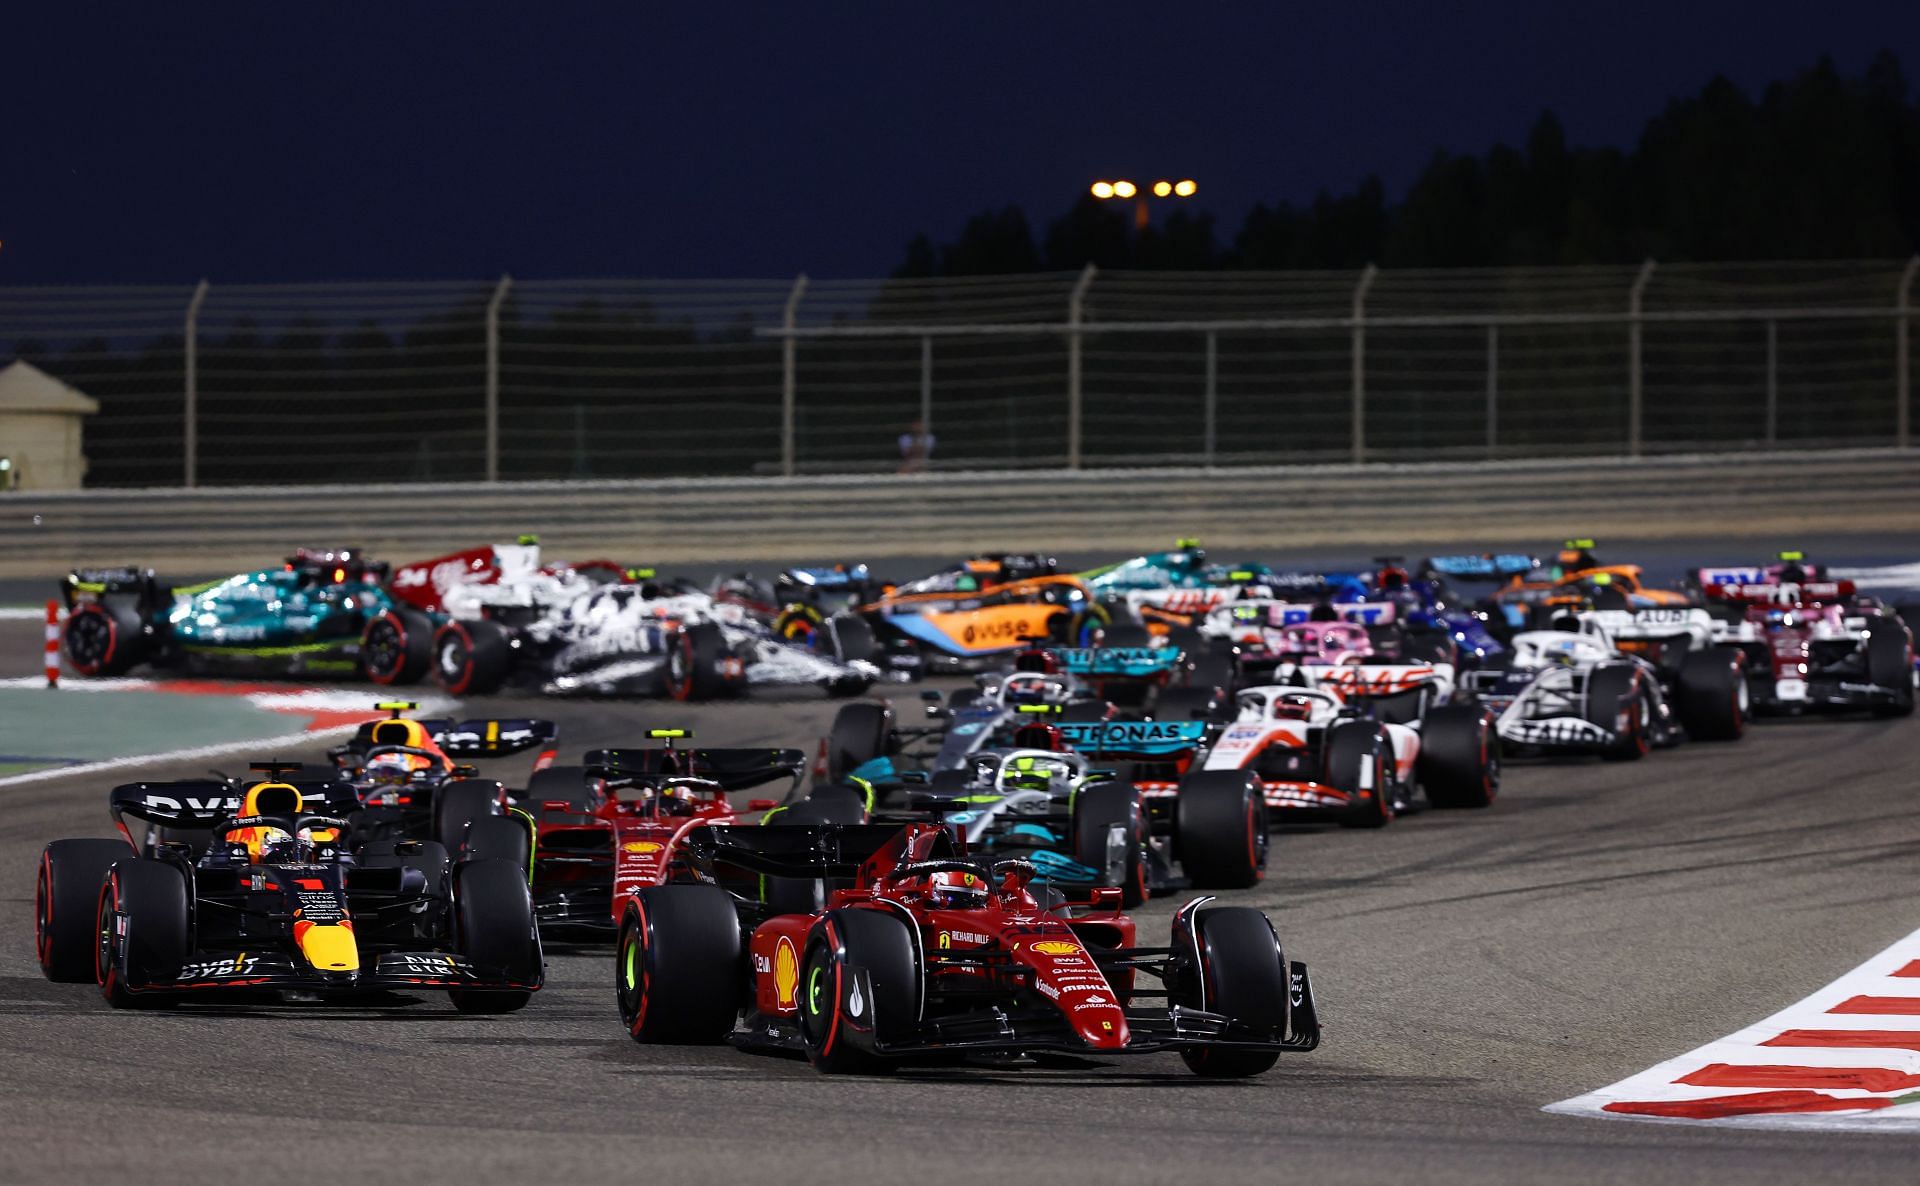 Heres what the F1 grid for the 2023 season looks like